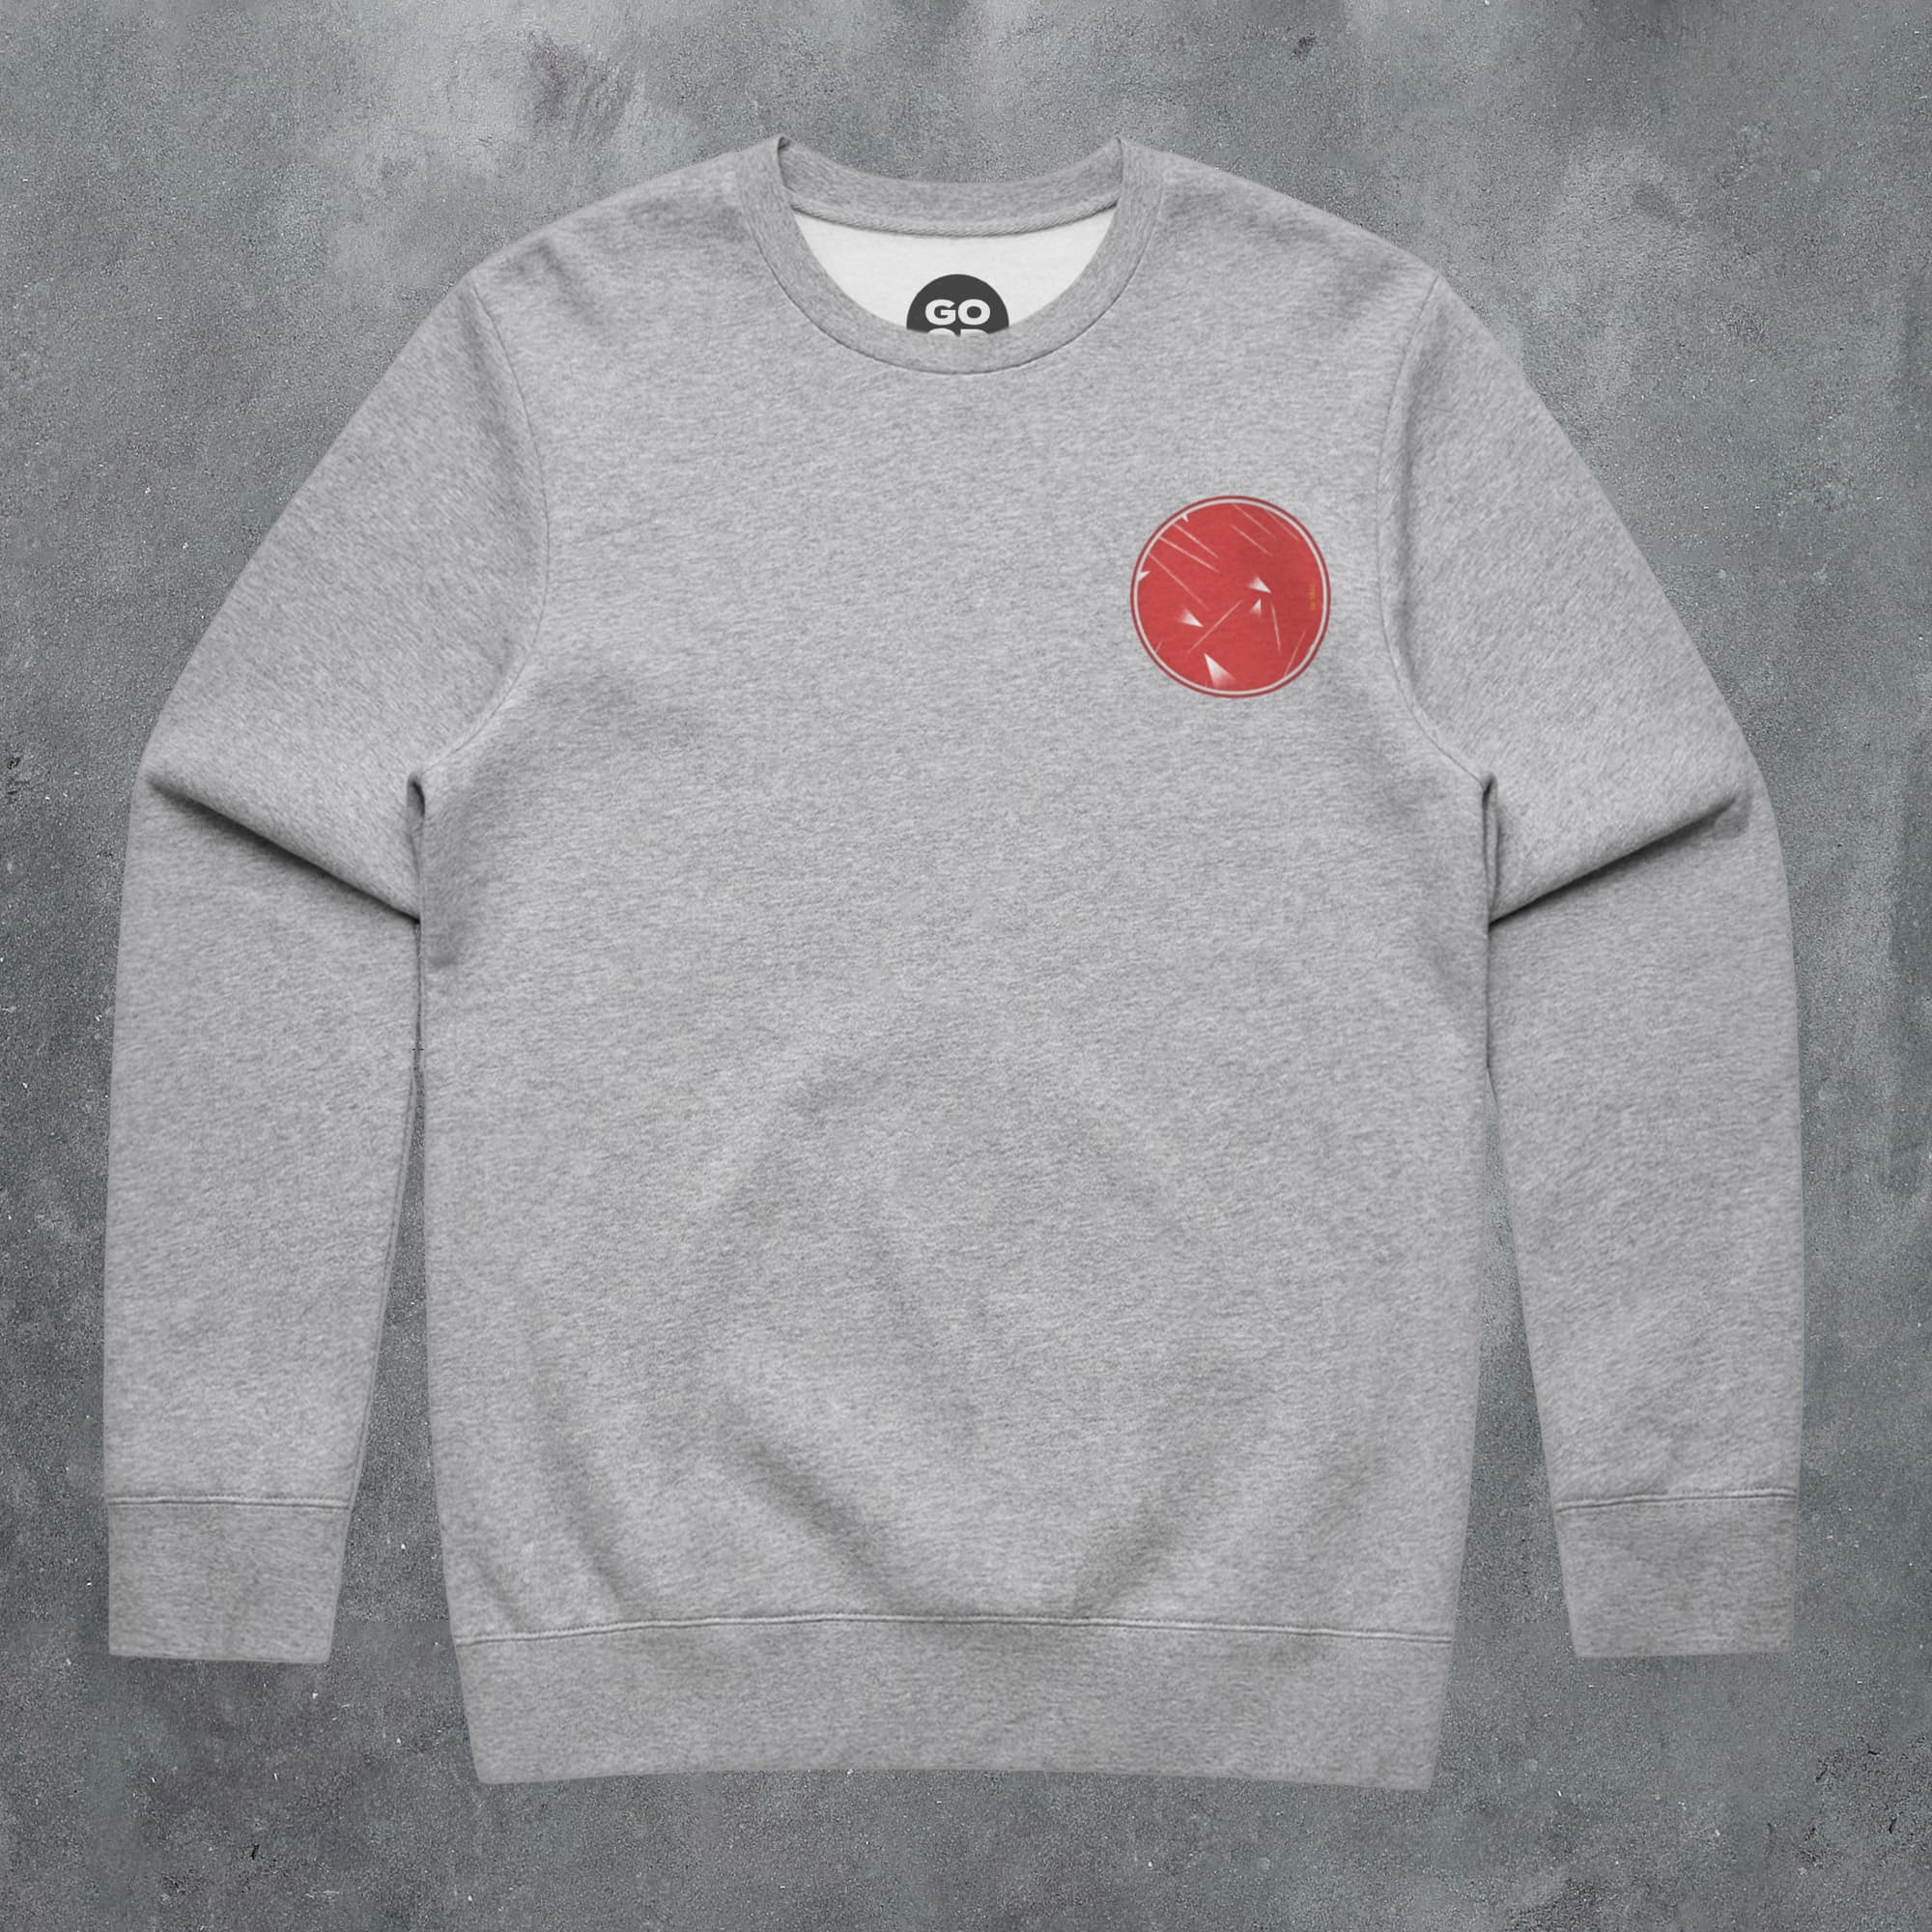 a grey sweatshirt with a red smiley face on it